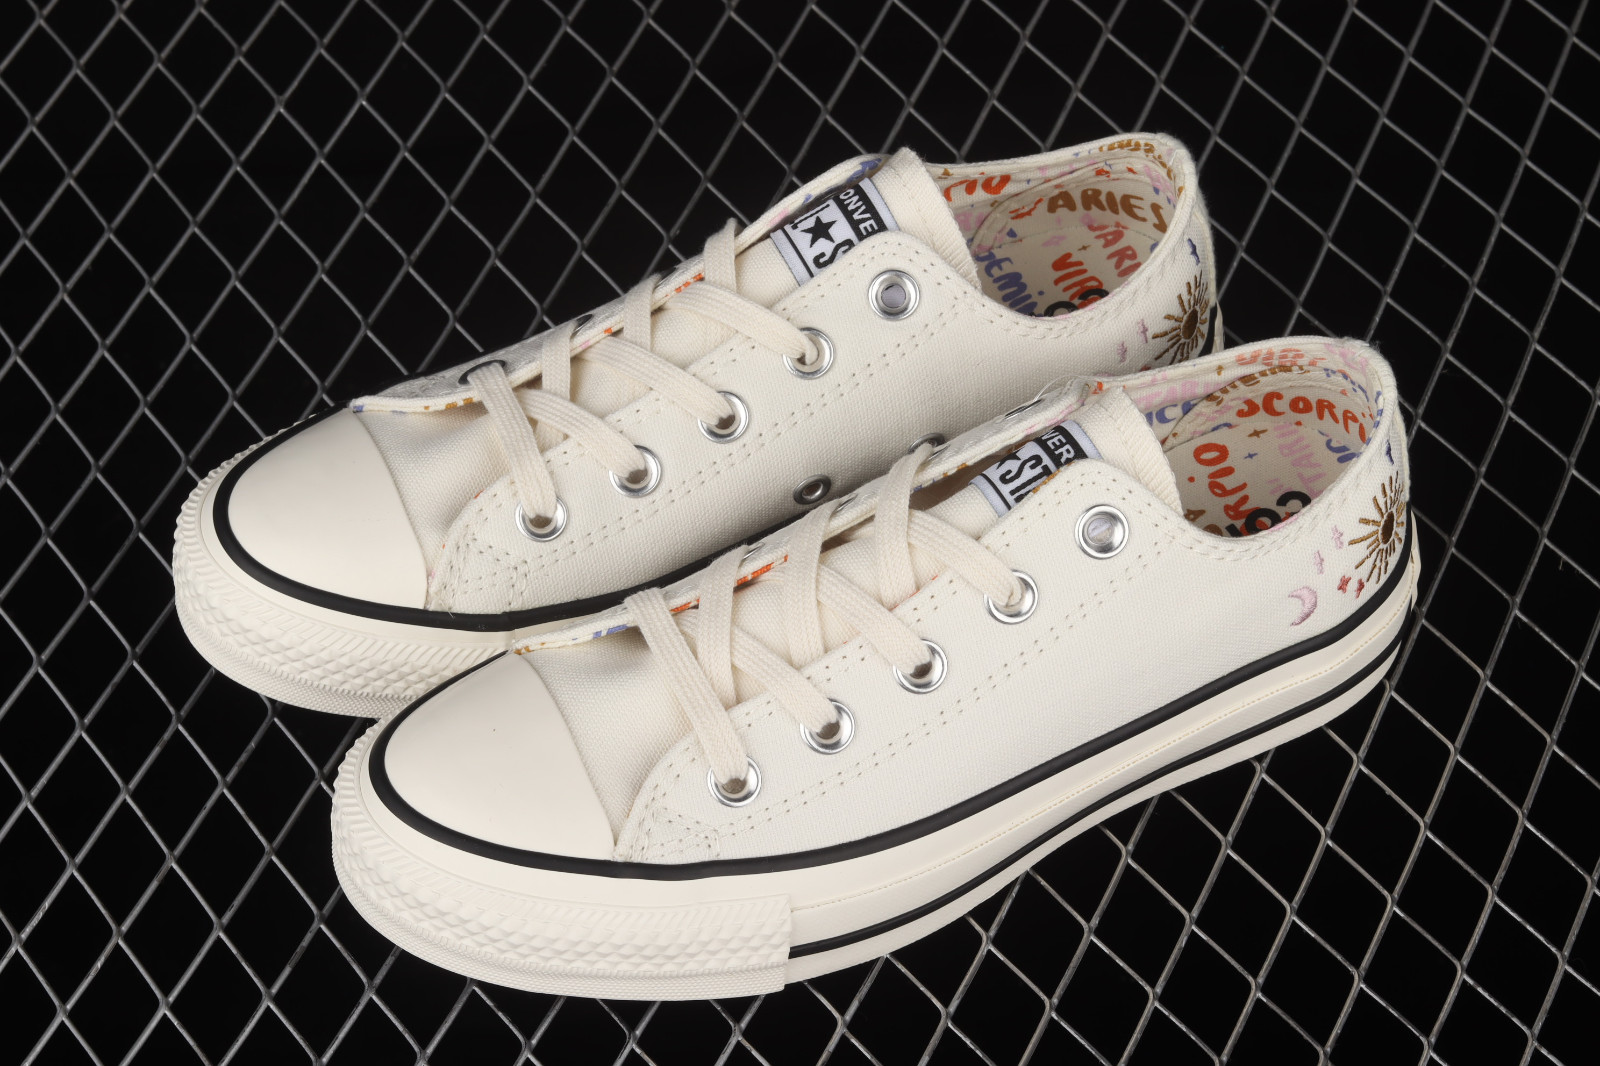 Converse Mystic World Chuck Taylor All Star 70 Low White 572426C - GmarShops